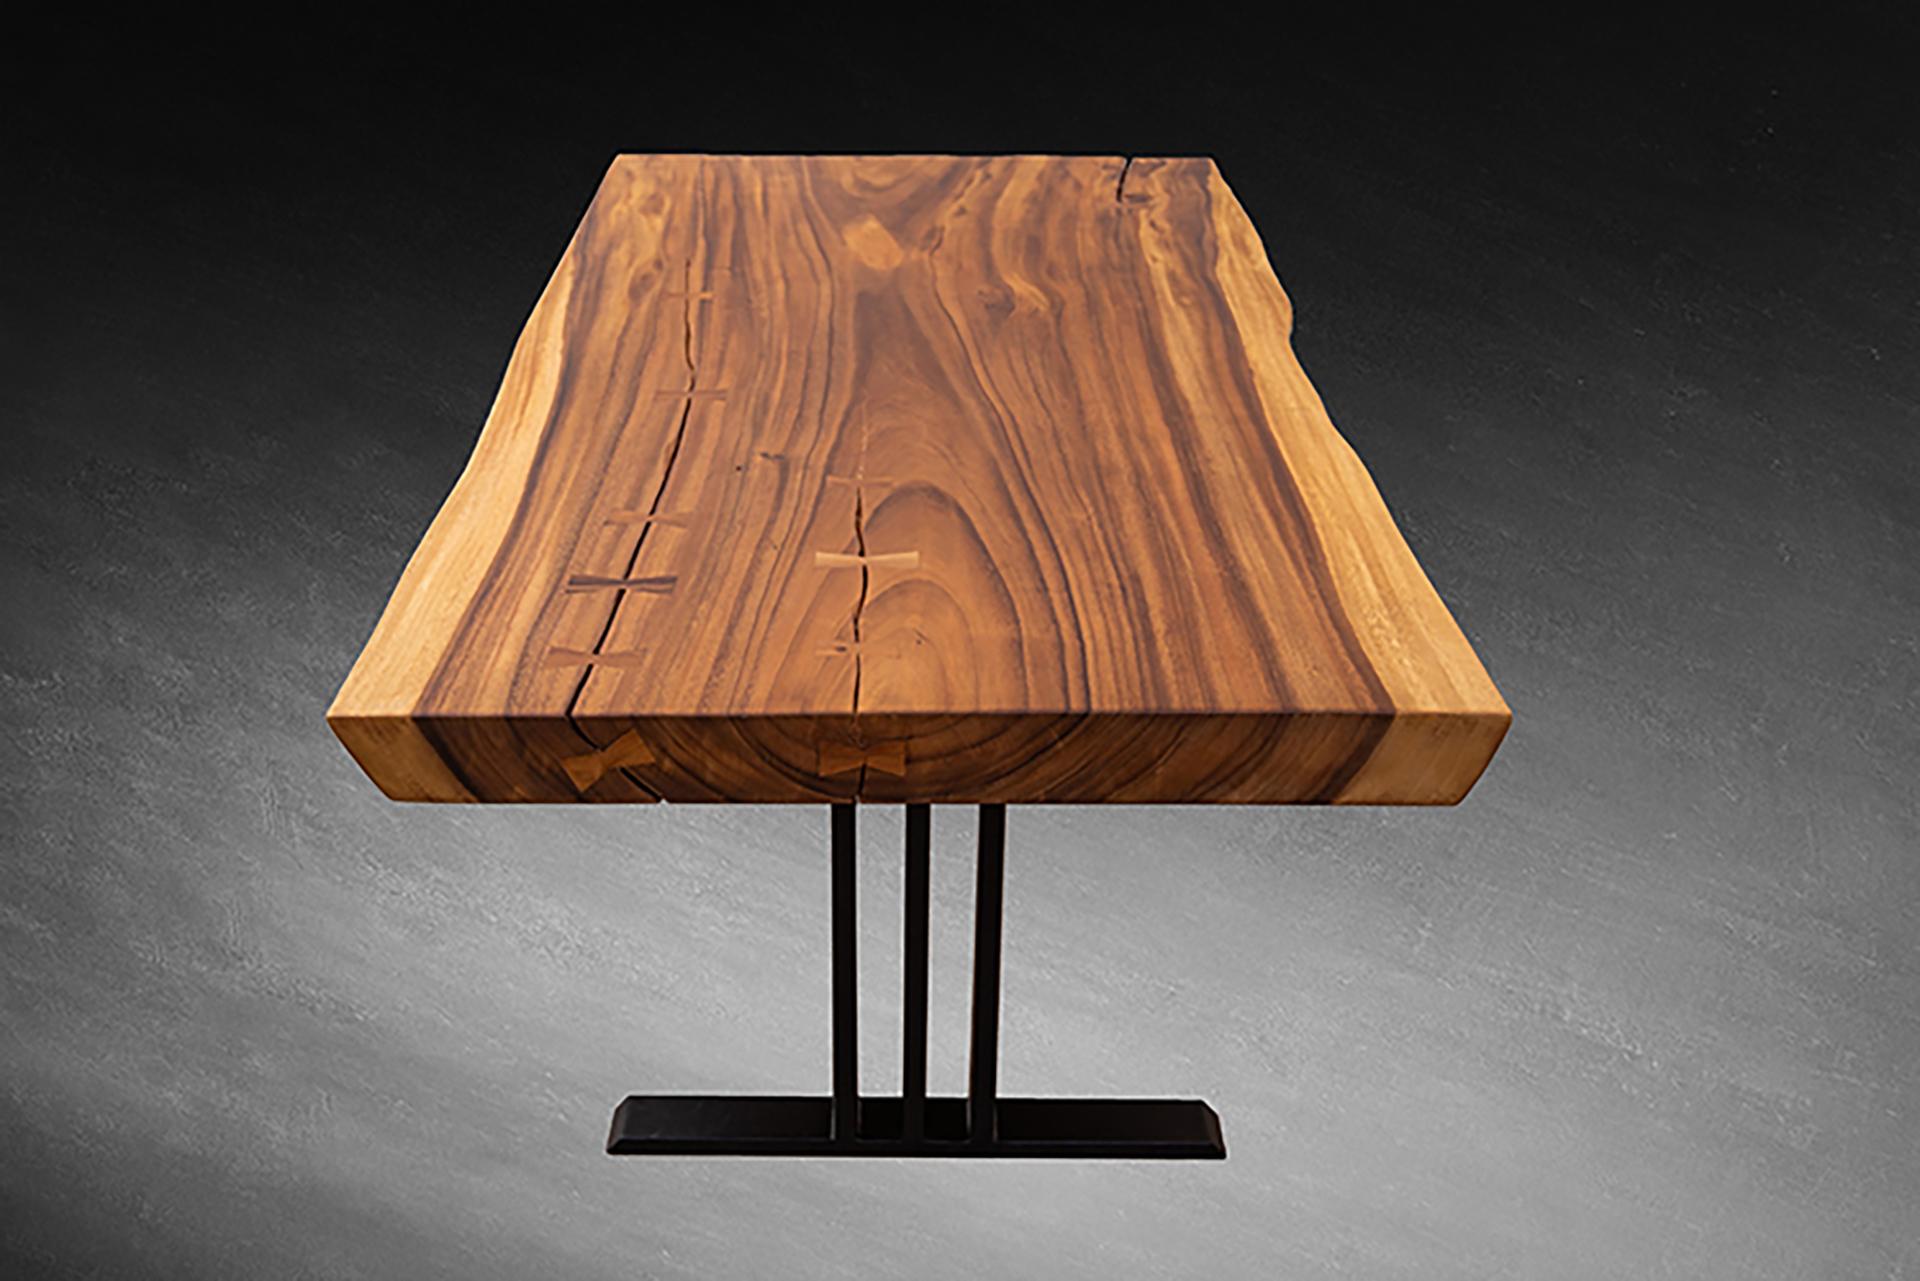 Hand-Crafted Acacia Live Edge Limited Edition Slab Table in Smooth Natural Acacia For Sale